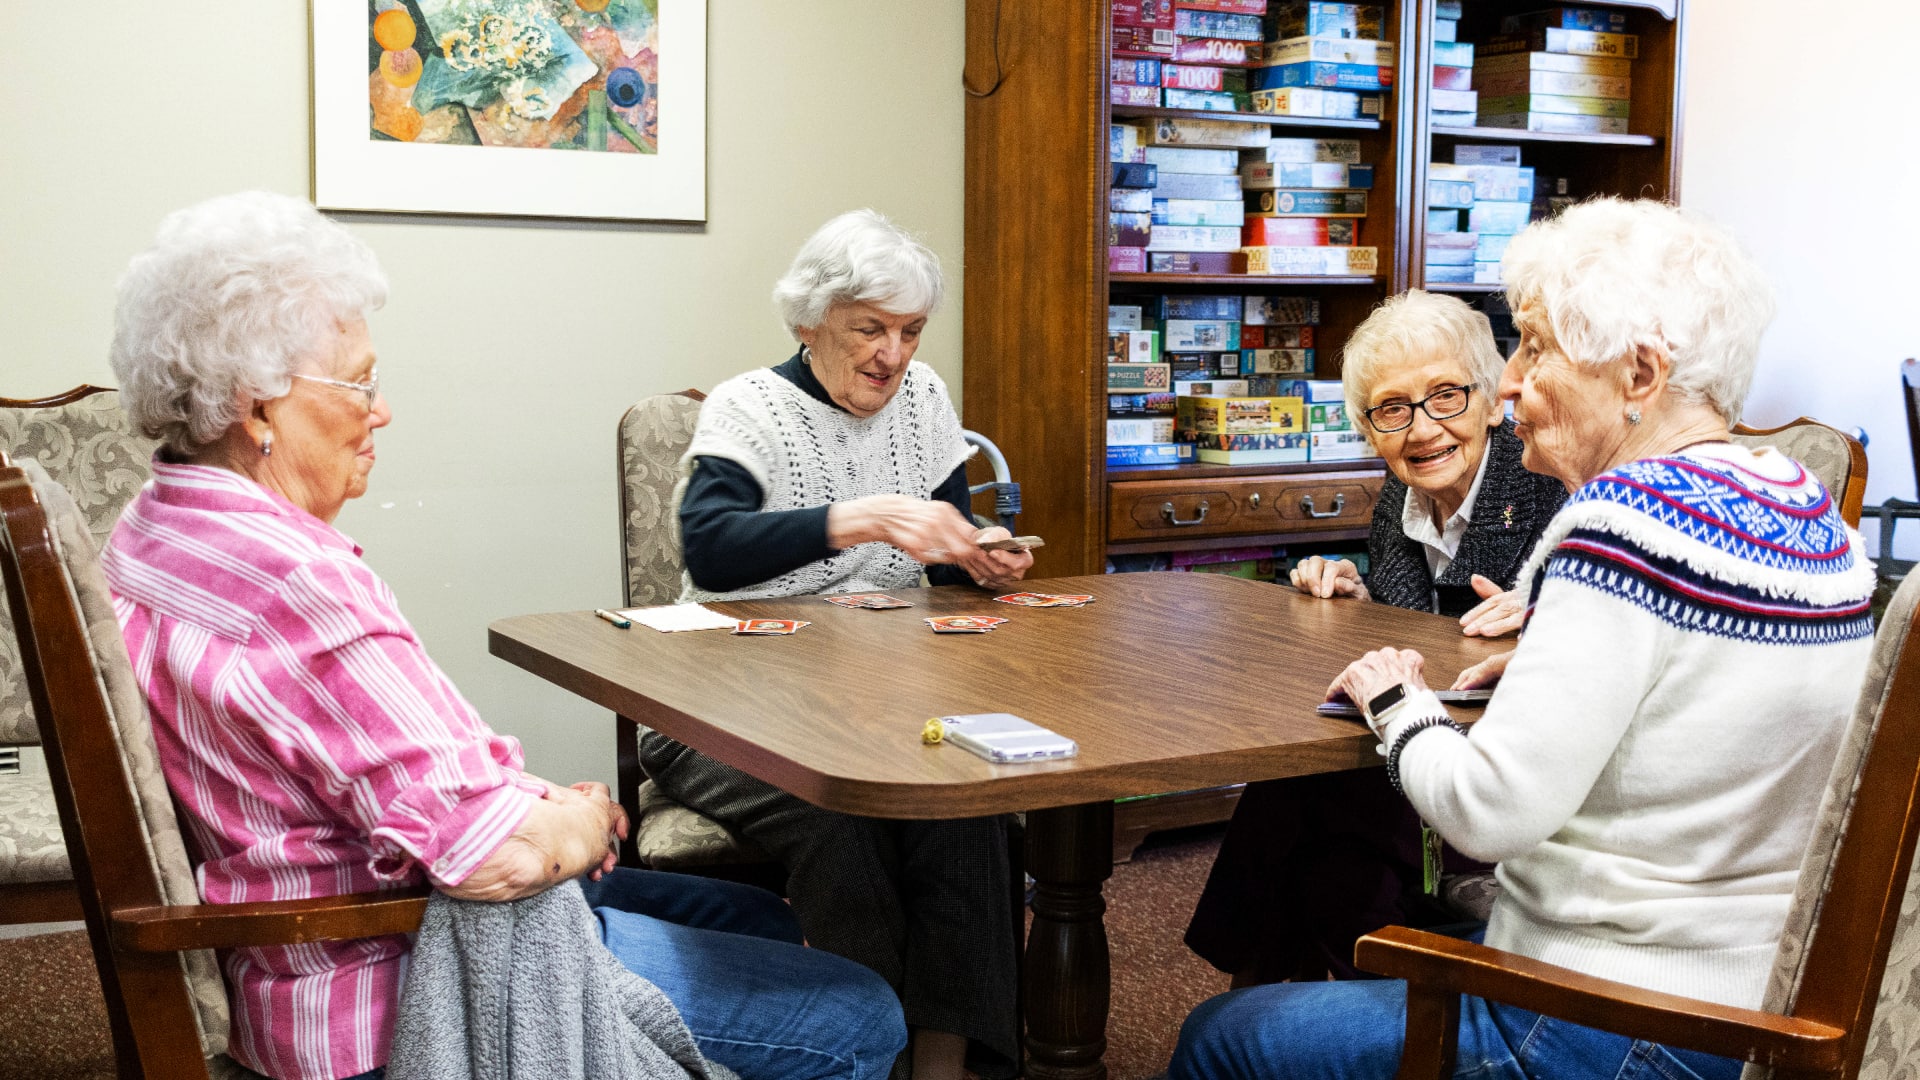 Game night at the Terrace Retirement Community. Four senior ladies playing a game of cards.